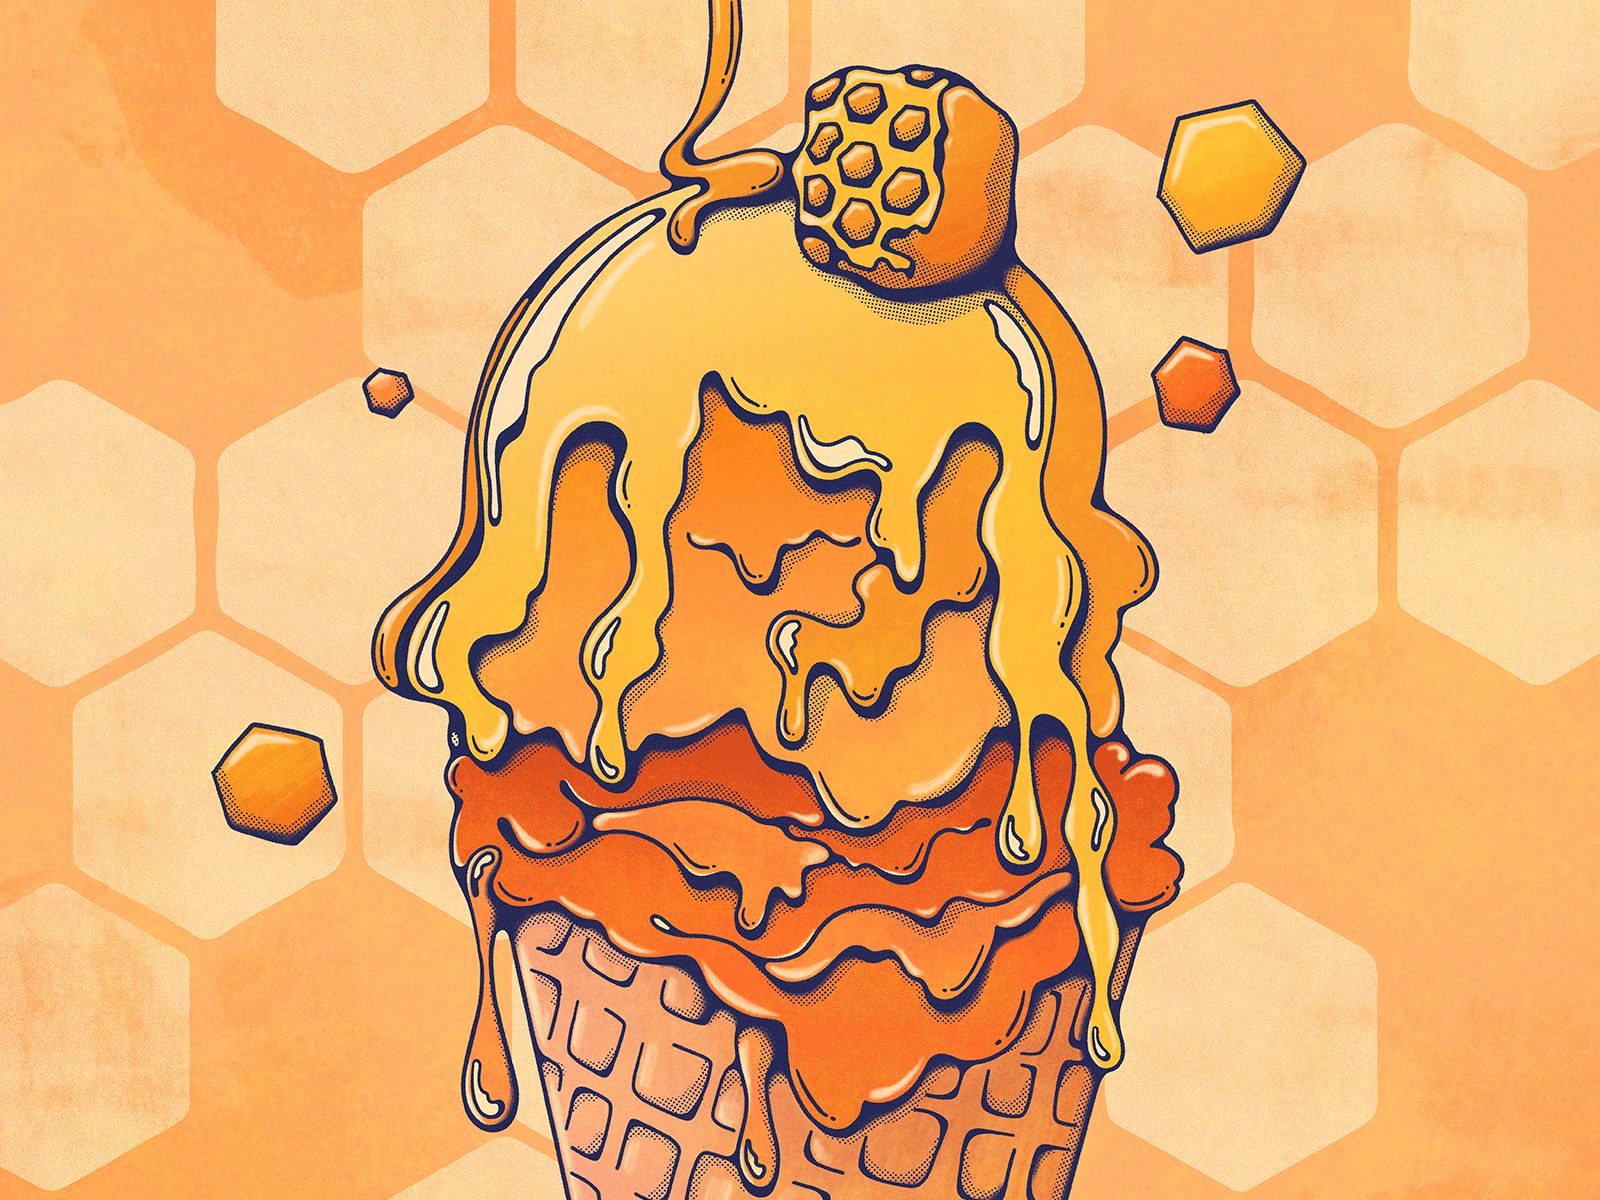 I Quit Sugar - now all I want are sweets 70s cherry choc mint colorful editorial illustration food illustration honeycomb i quit sugar icecream illustrated sweets illustration livelyscout milkshake procreate psychedelic retro sundae sweets